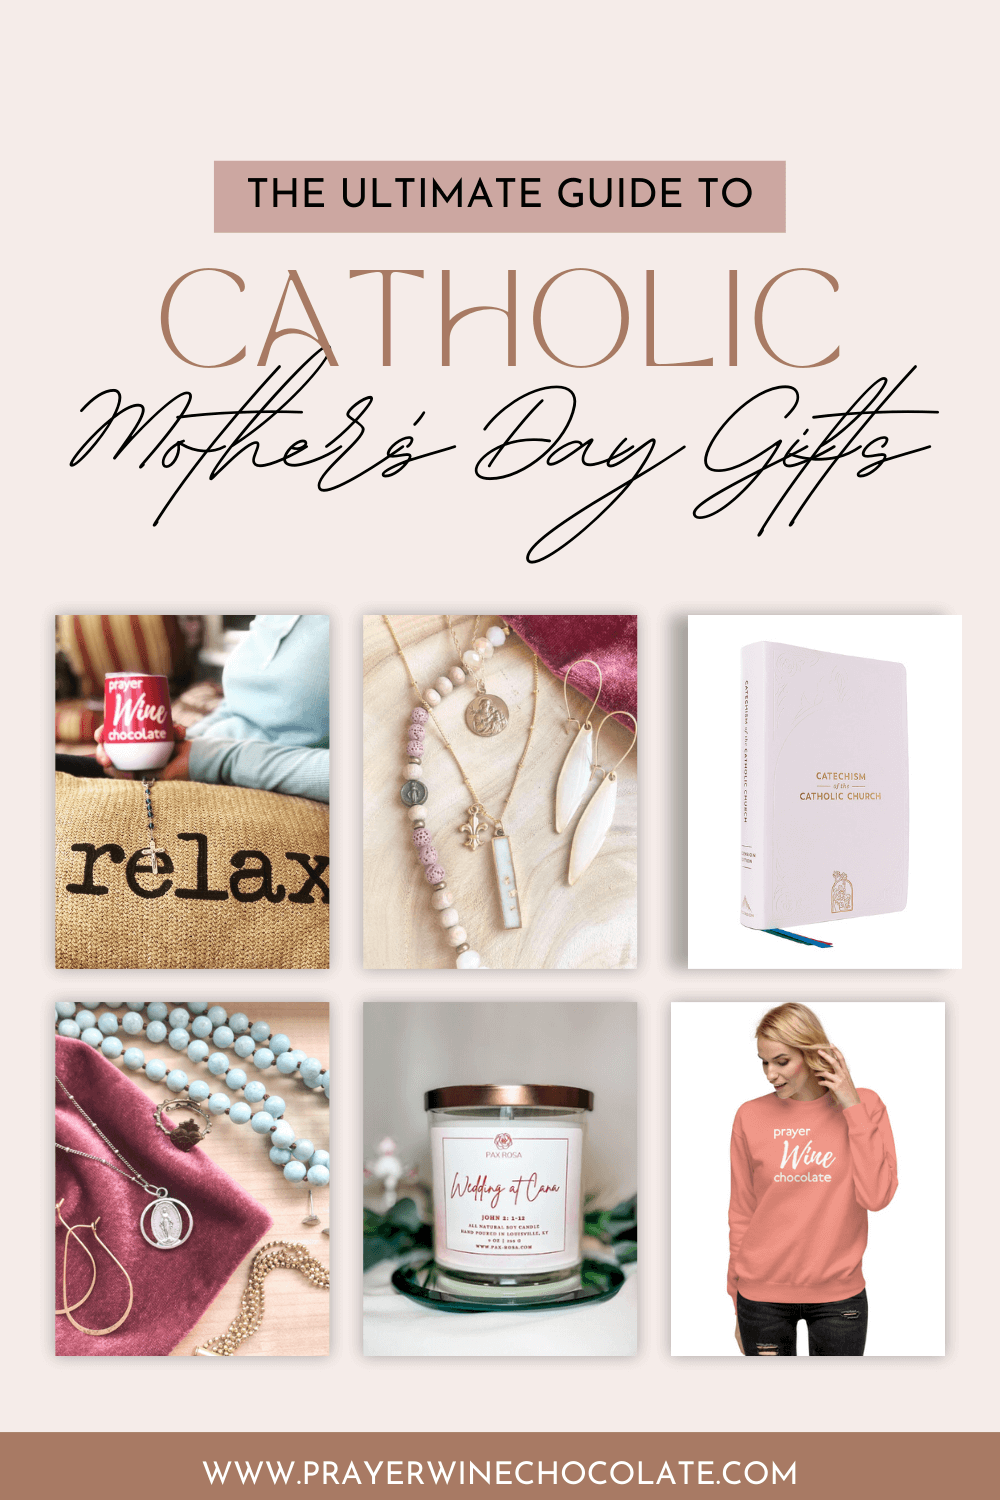 The Ultimate Guide to Catholic Mother's Day Gifts image with a collage of gifts mentioned in post.